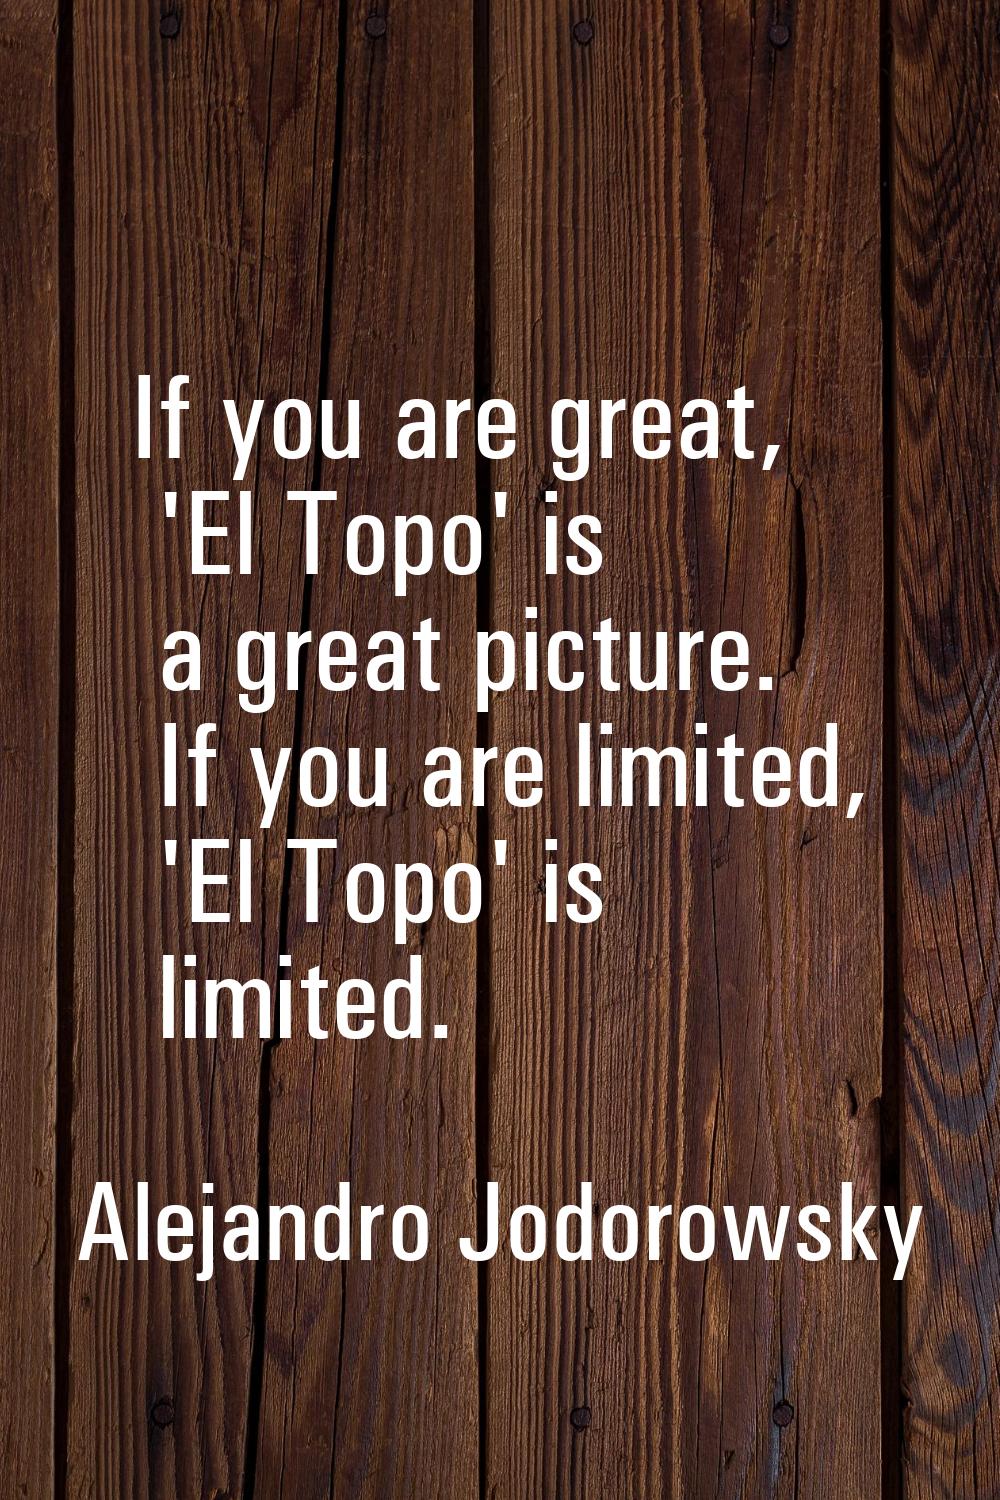 If you are great, 'El Topo' is a great picture. If you are limited, 'El Topo' is limited.